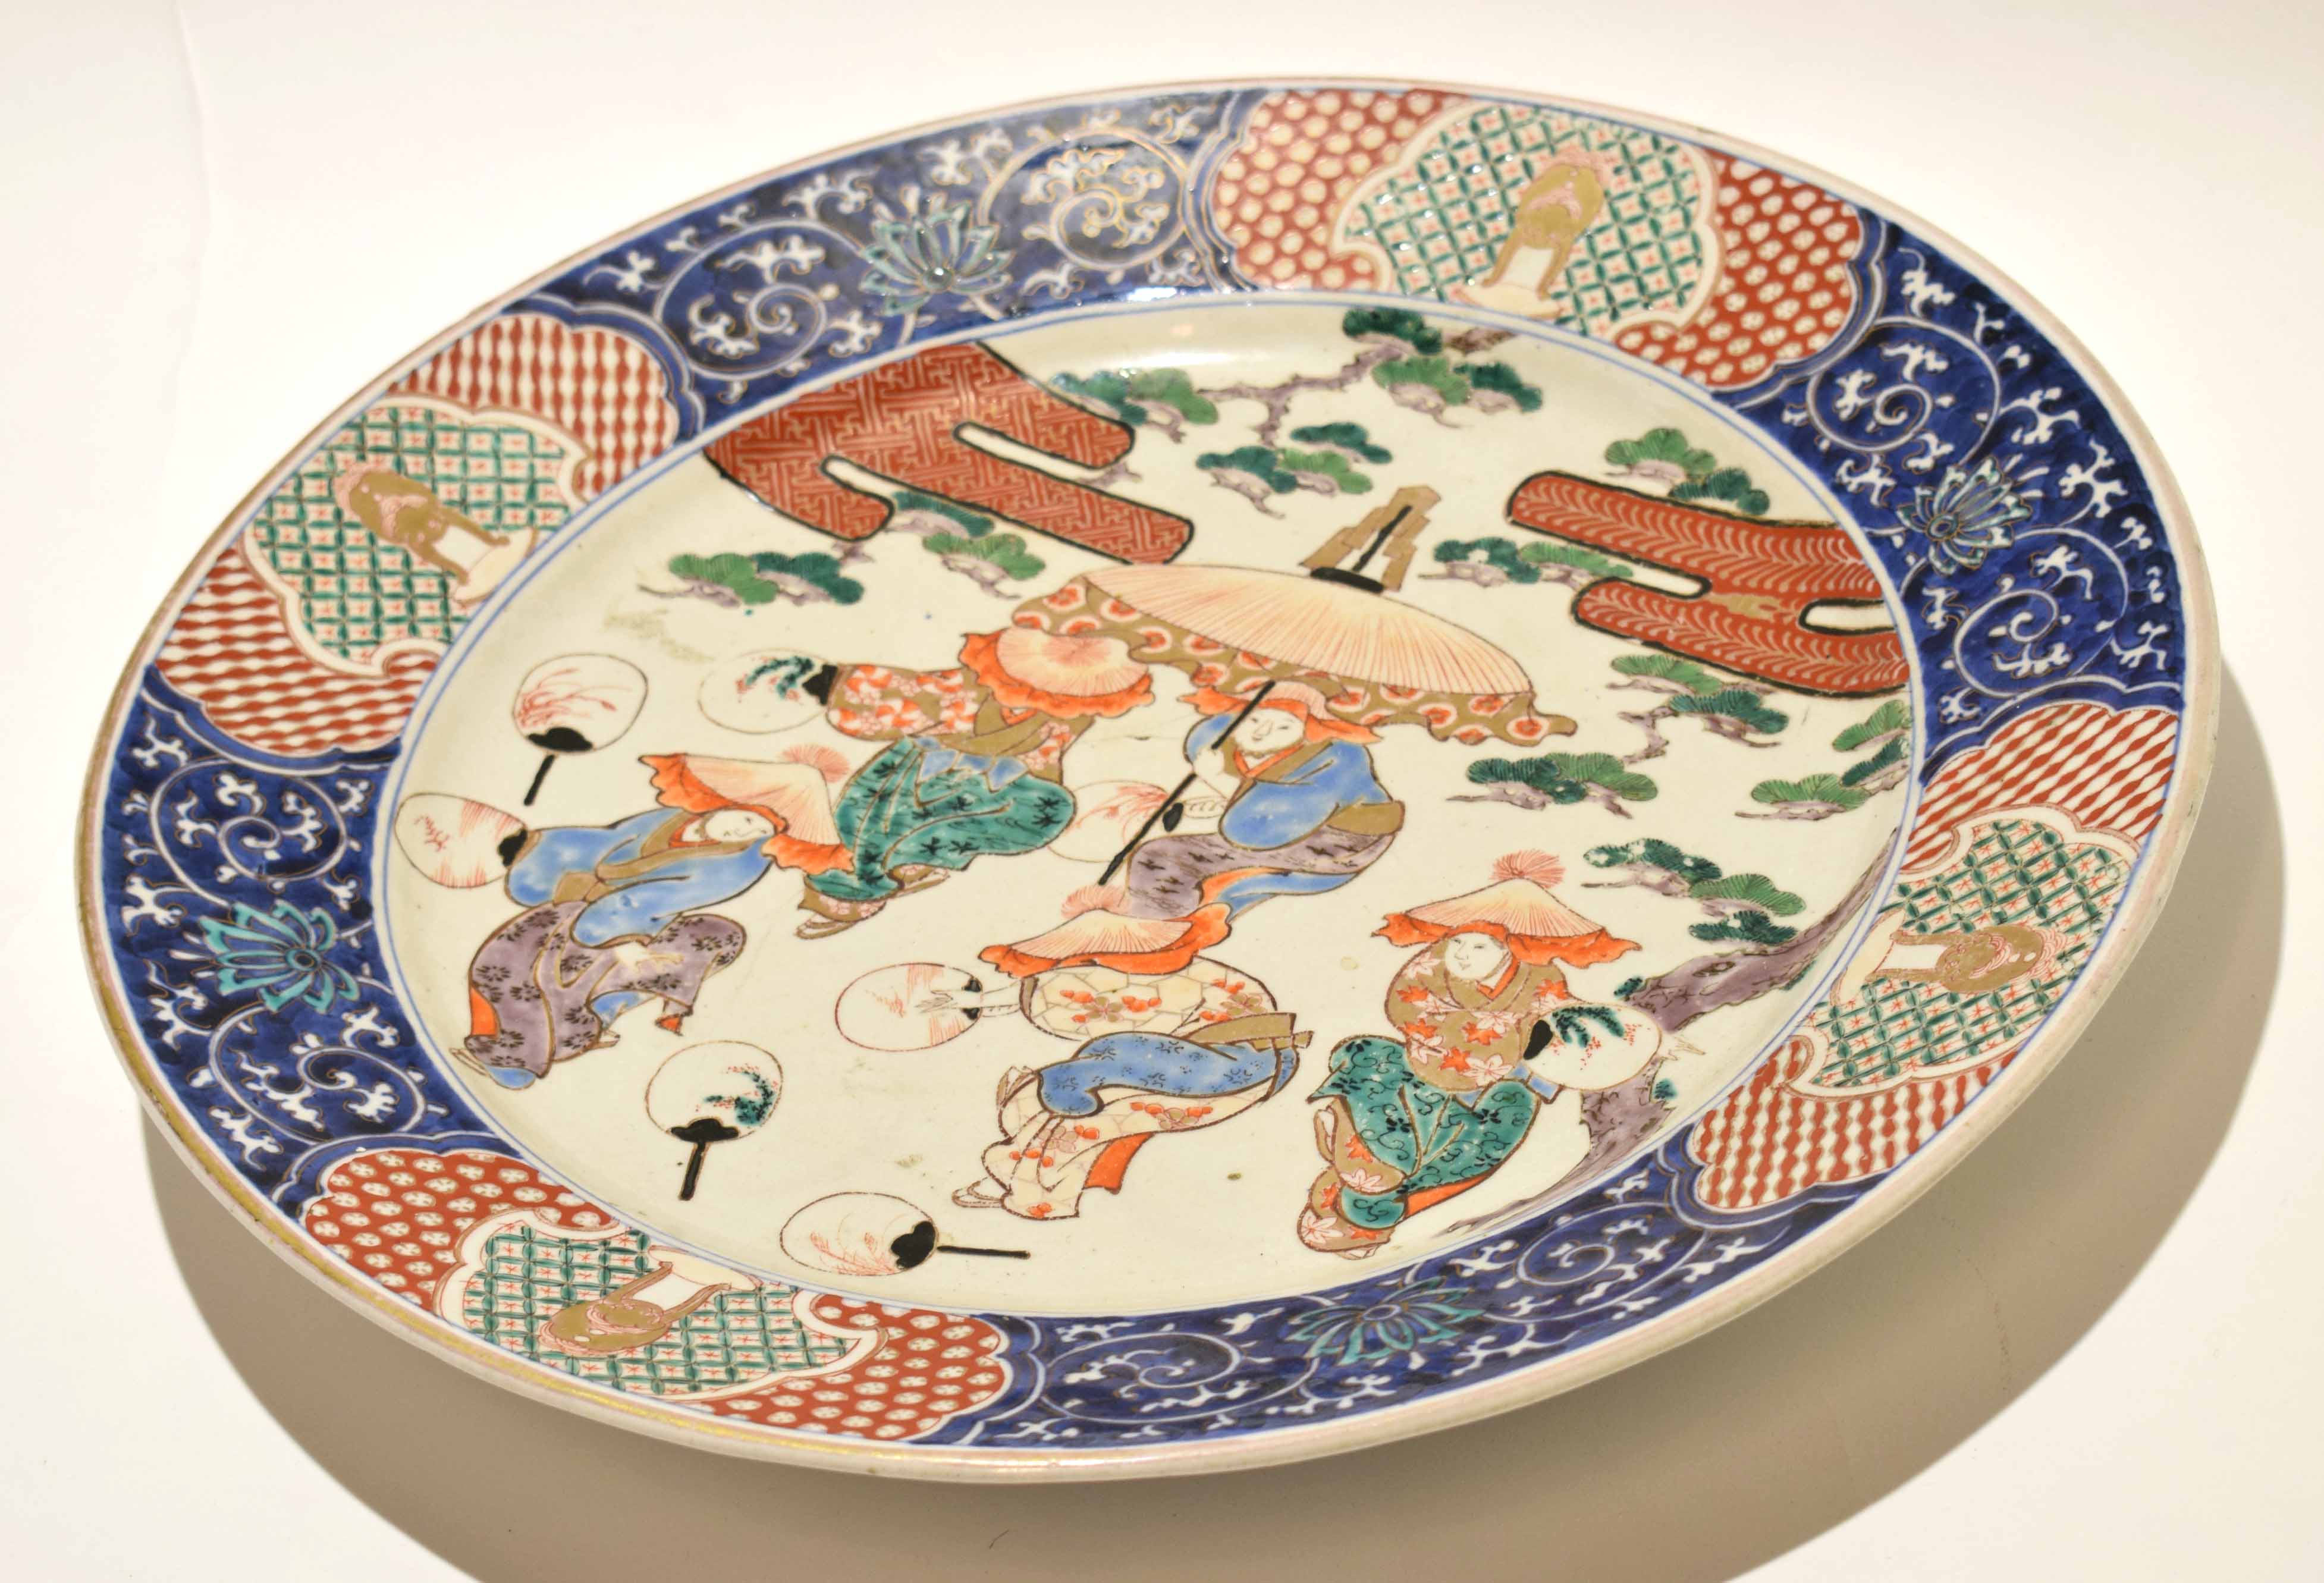 Late 19th century Japanese porcelain charger, decorated with figures at various pursuits within an